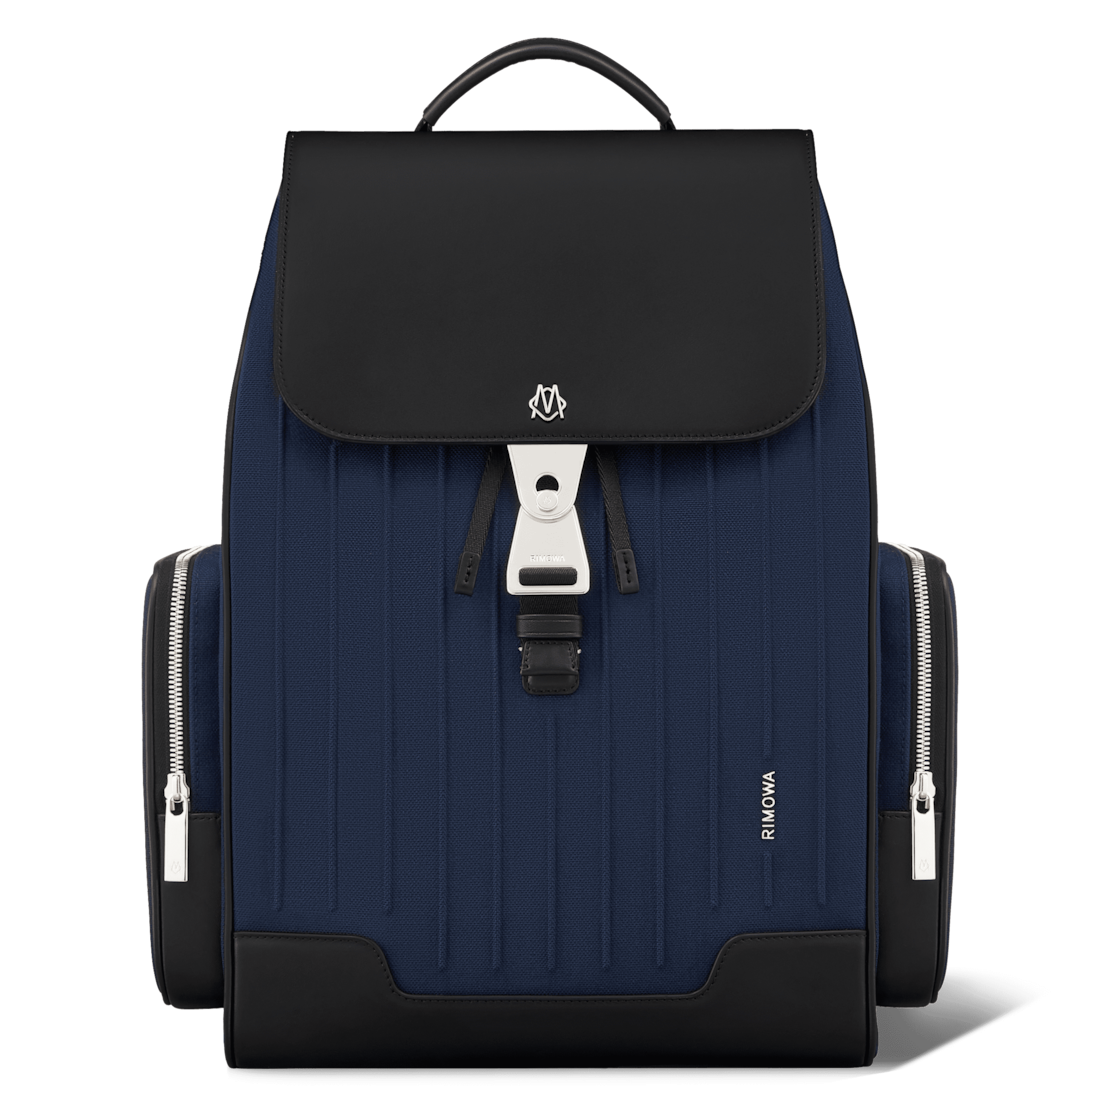 Rimowa Canvas & Leather In Navy & Black